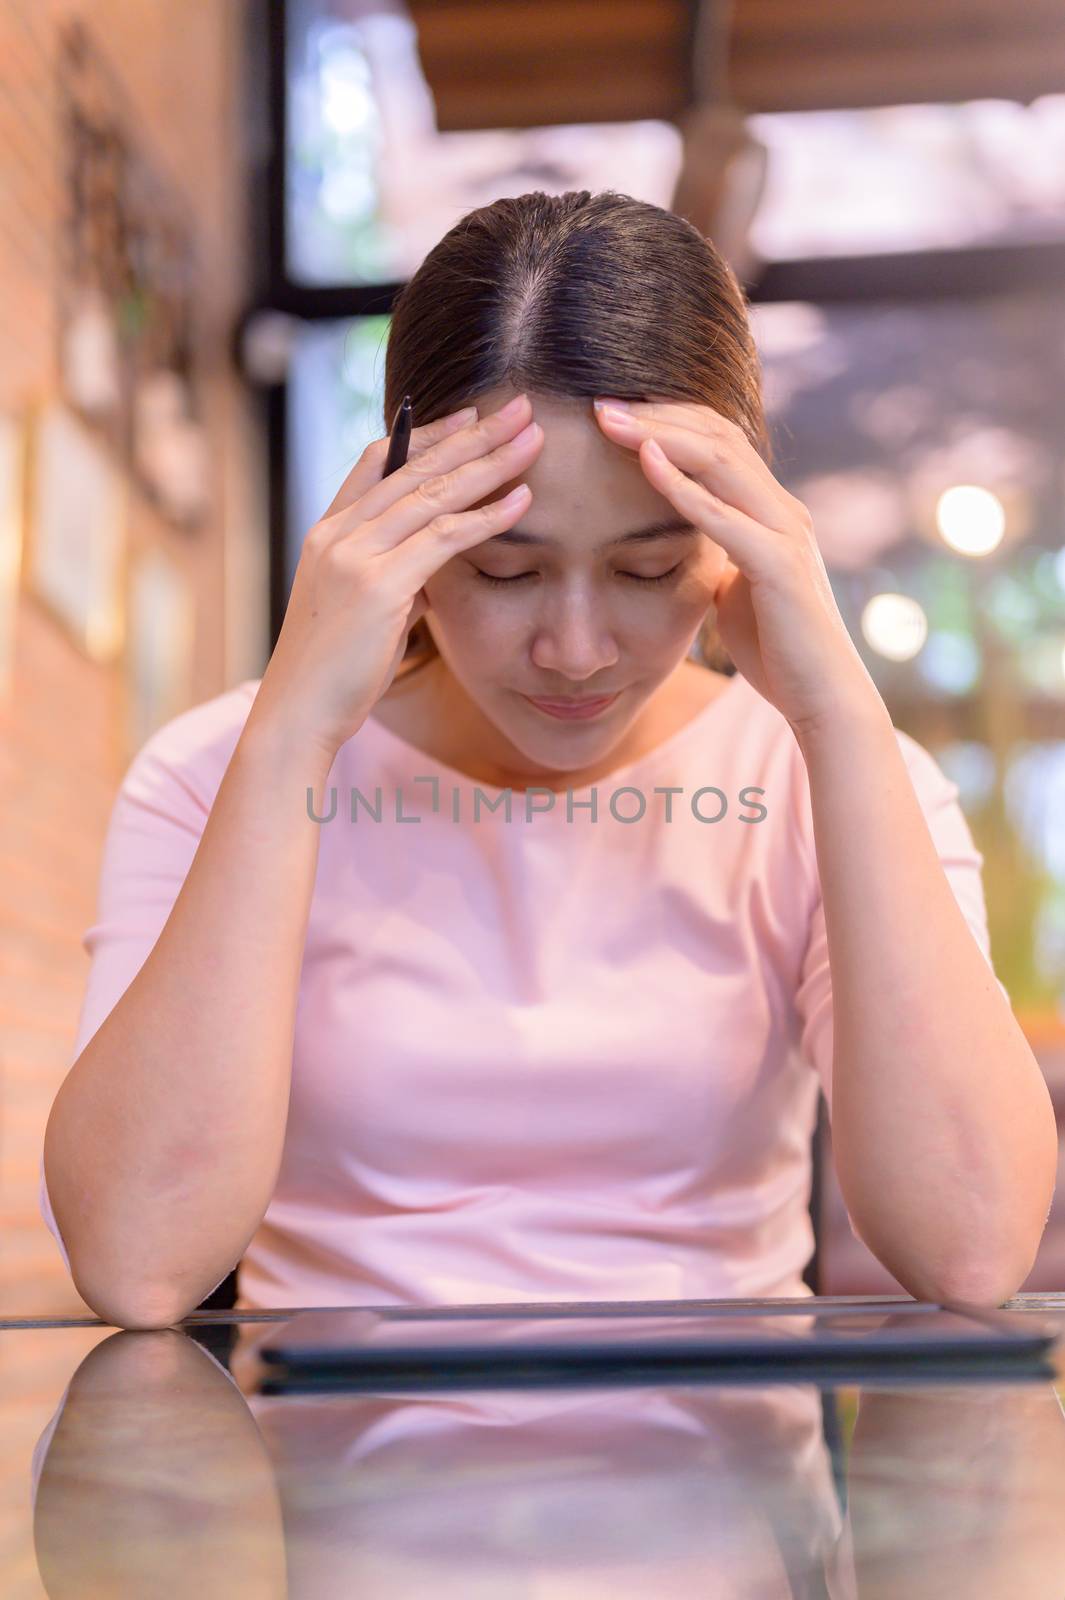 Unemployment and Mental health problem. Corona virus job losses in Asia. Thai businesswoman looking for new job on website. Post-traumatic stress disorder (PTSD).